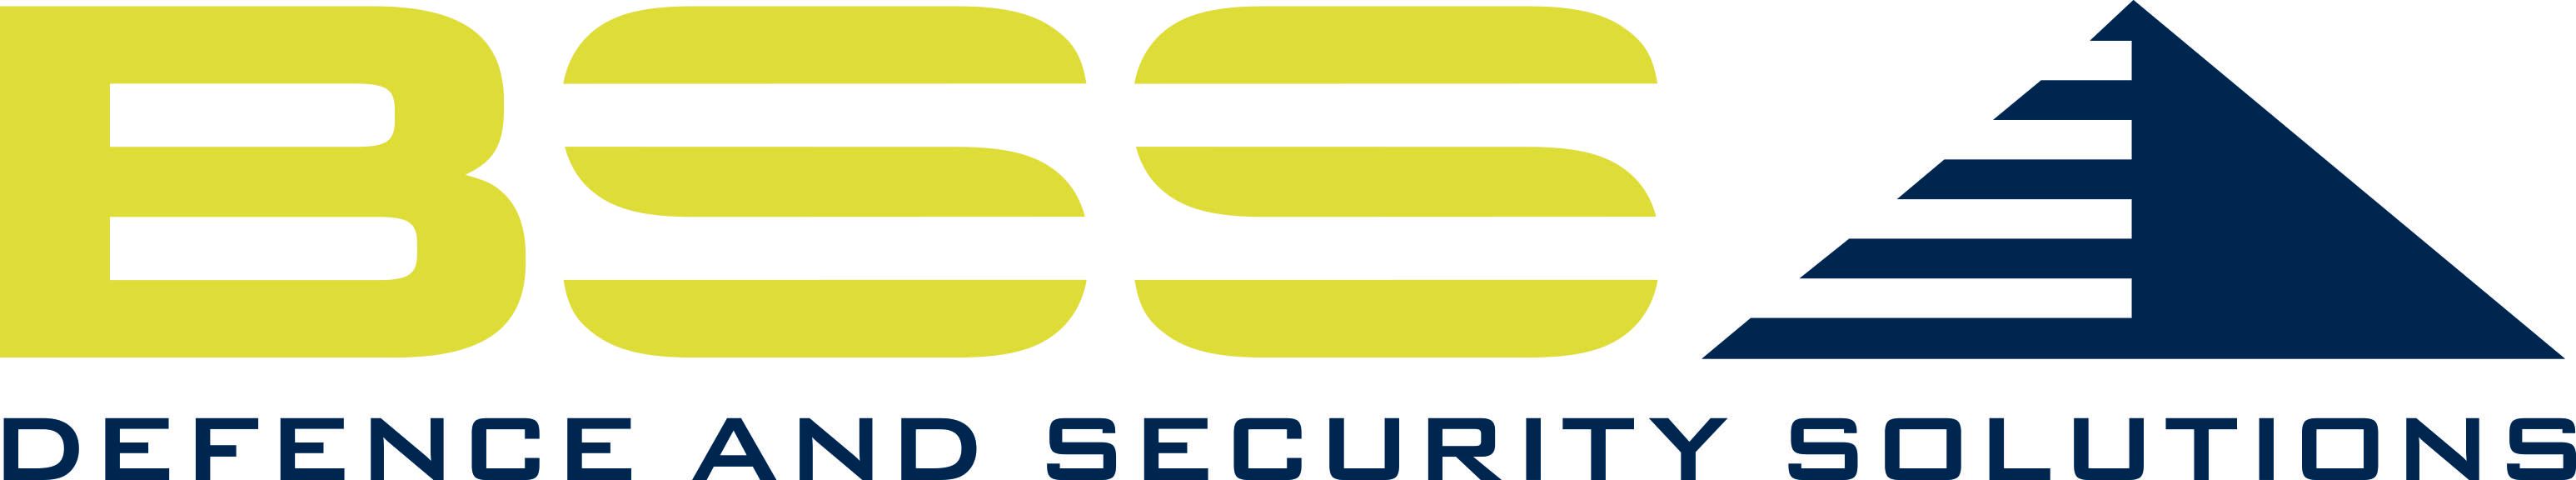 BSS Defence and Security Solutions